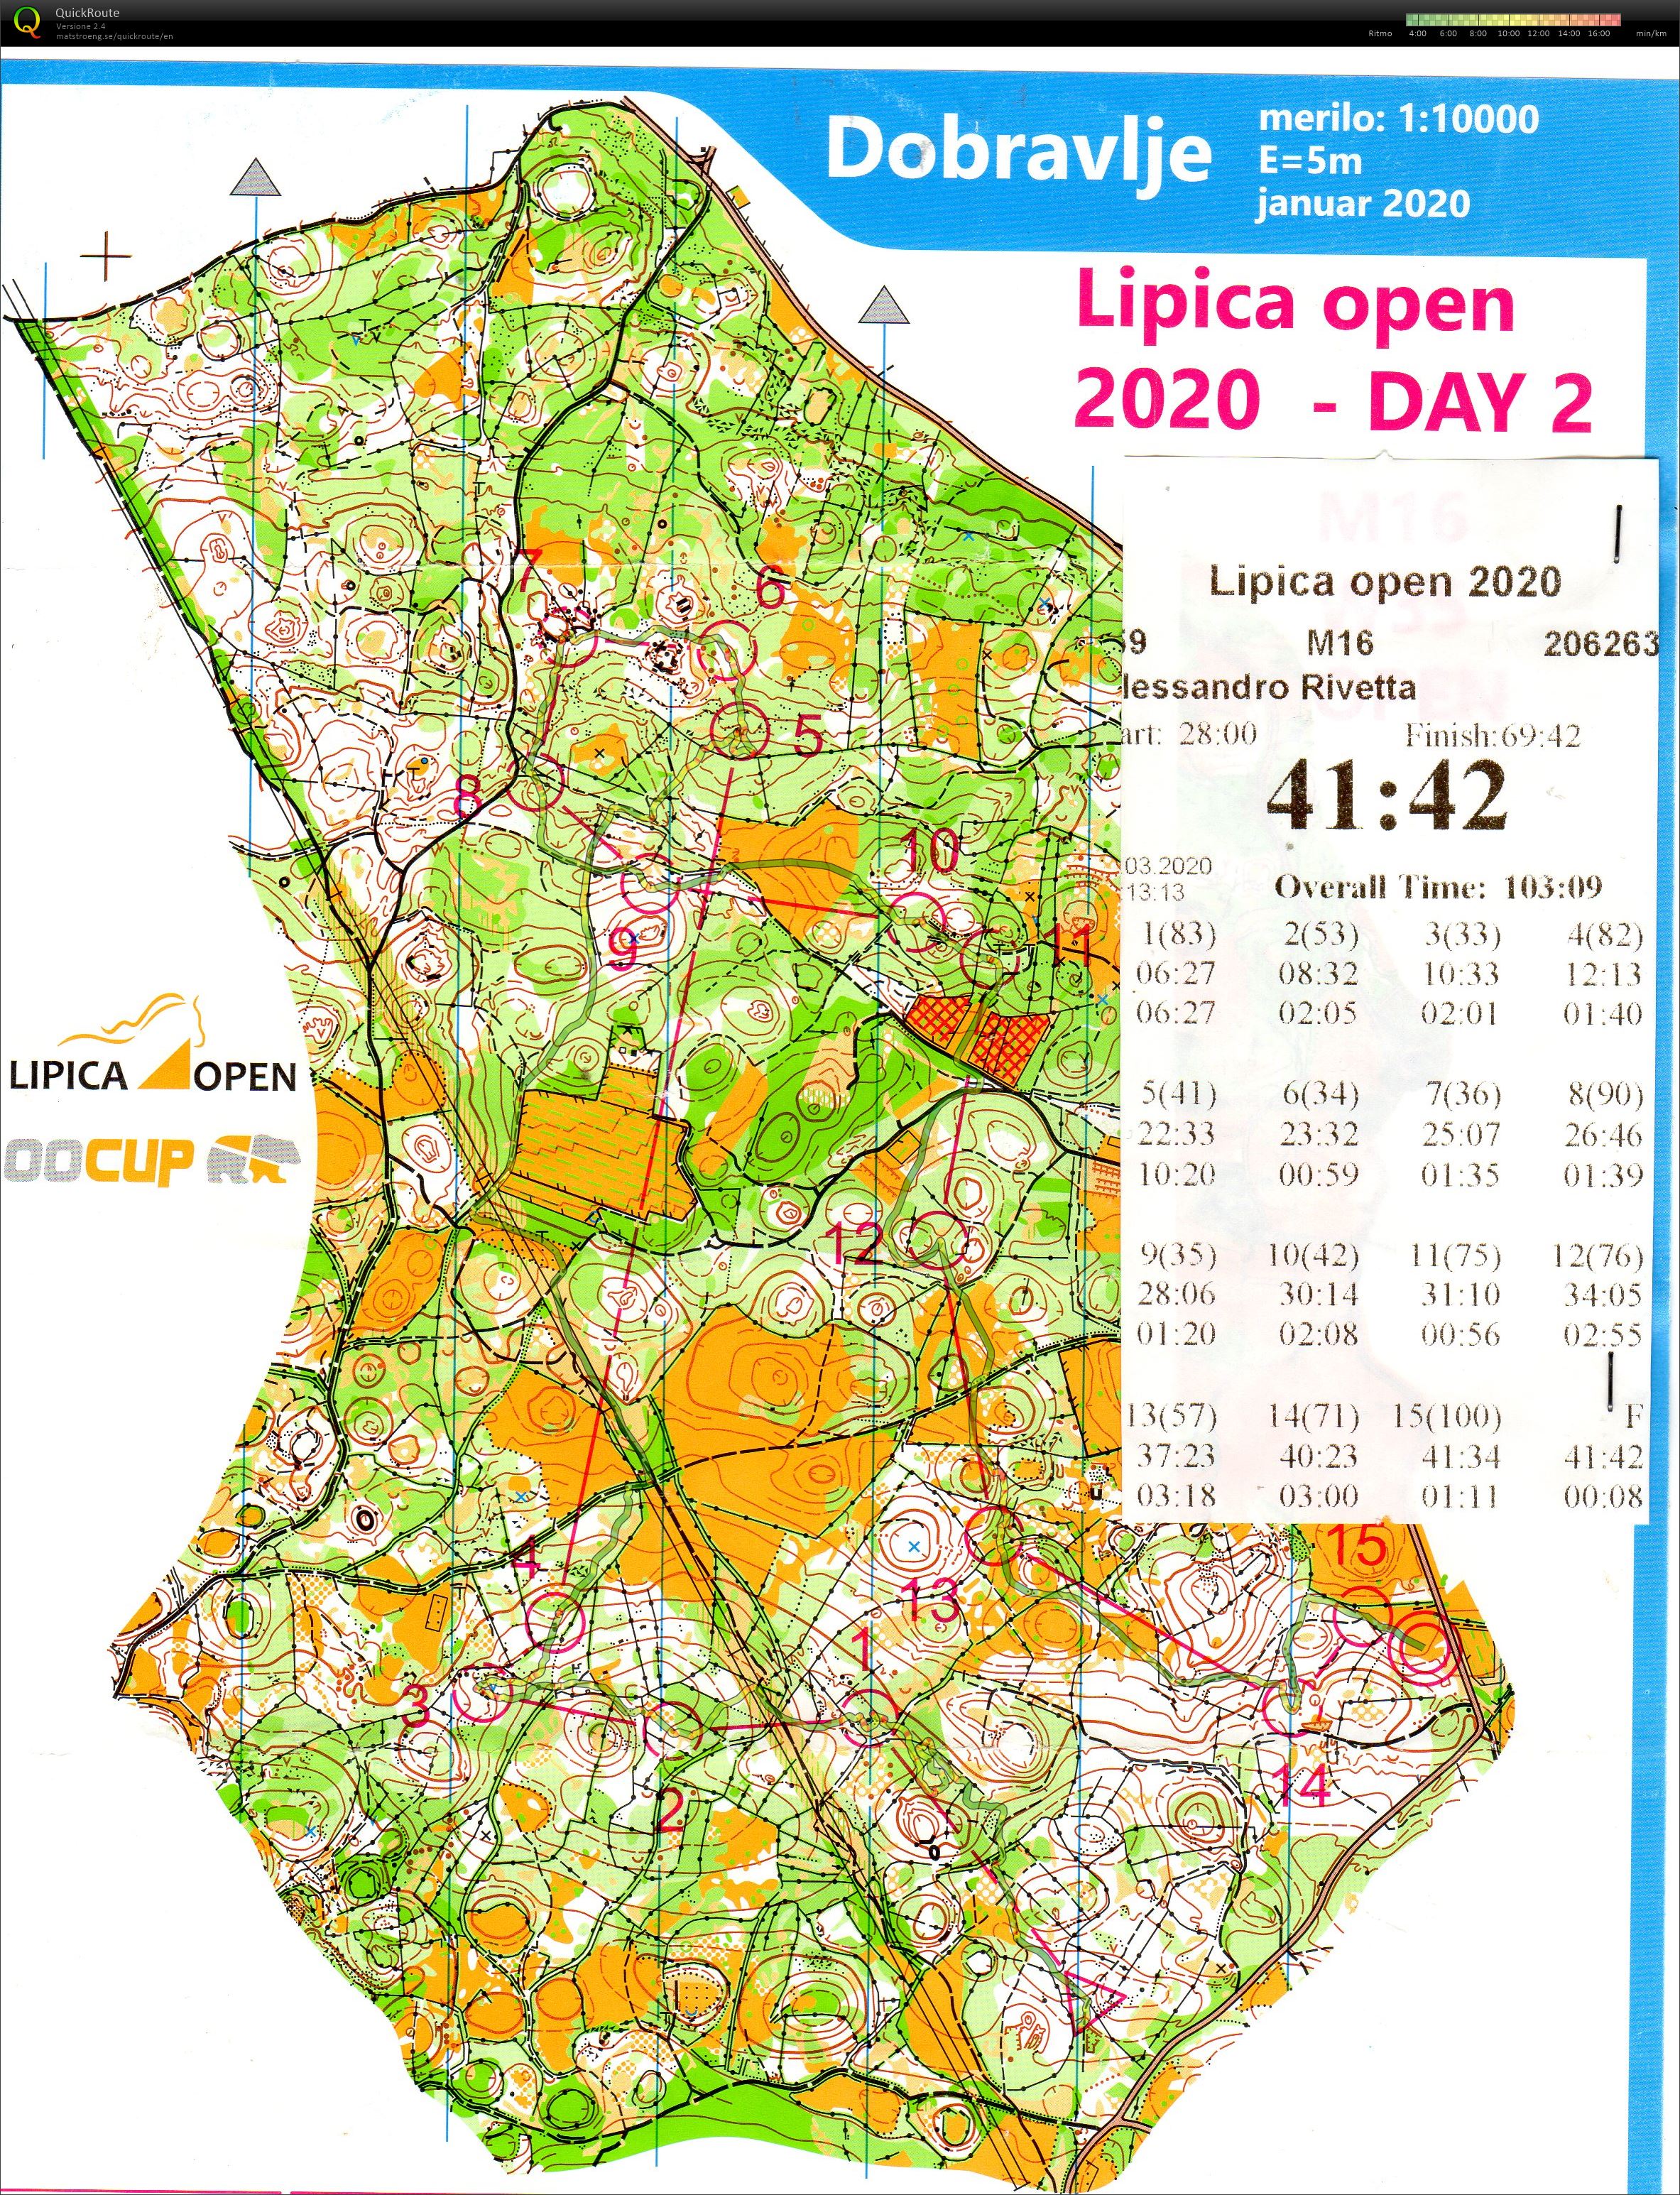 Lipica Open - Day 2 (08-03-2020)